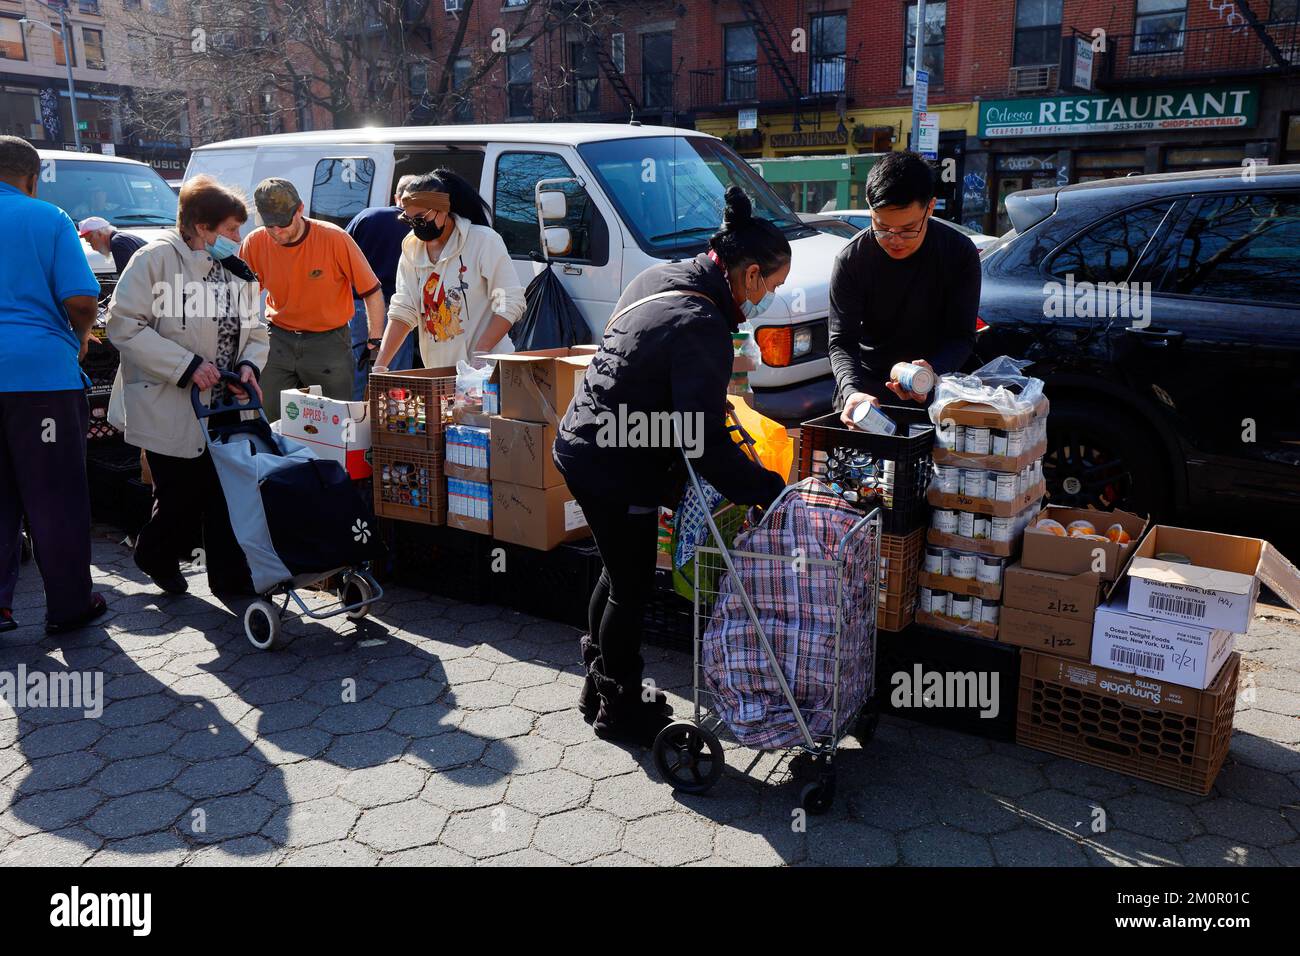 People at a food pantry in Manhattan's East Village neighborhood, March 19, 2022. The food pantry is run by Hope for the Future Ministries. Stock Photo